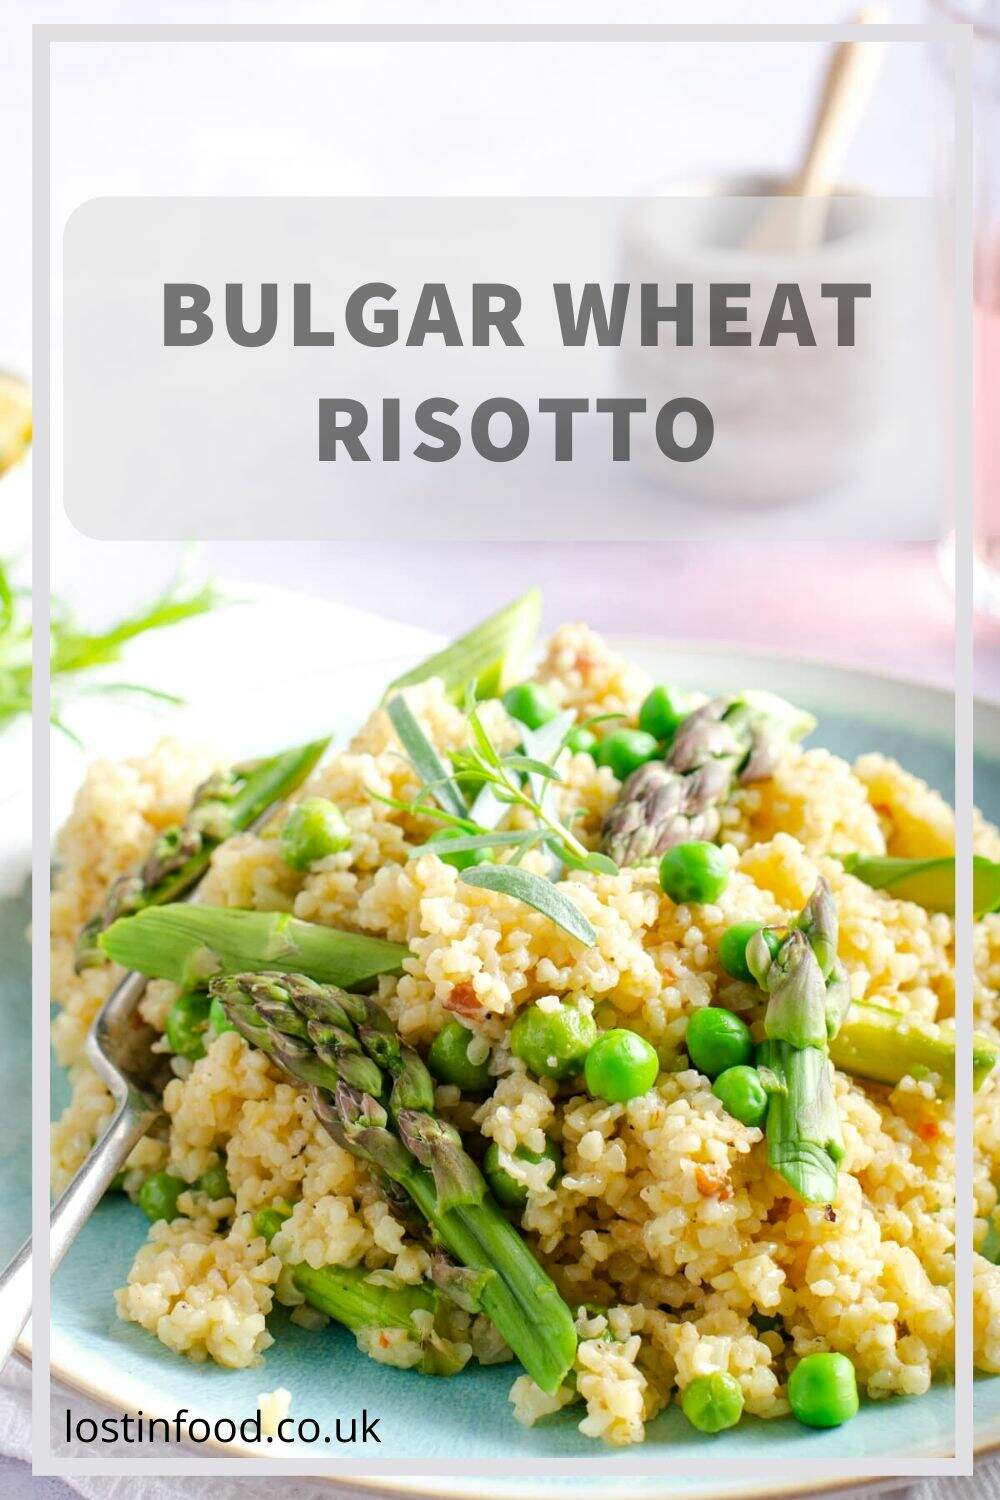 Bulgur wheat risotto, with new season asparagus, peas and smoked pancetta. A tasty dish that is simple and quick to prepare, making it a great mid-week dinner for all the family.